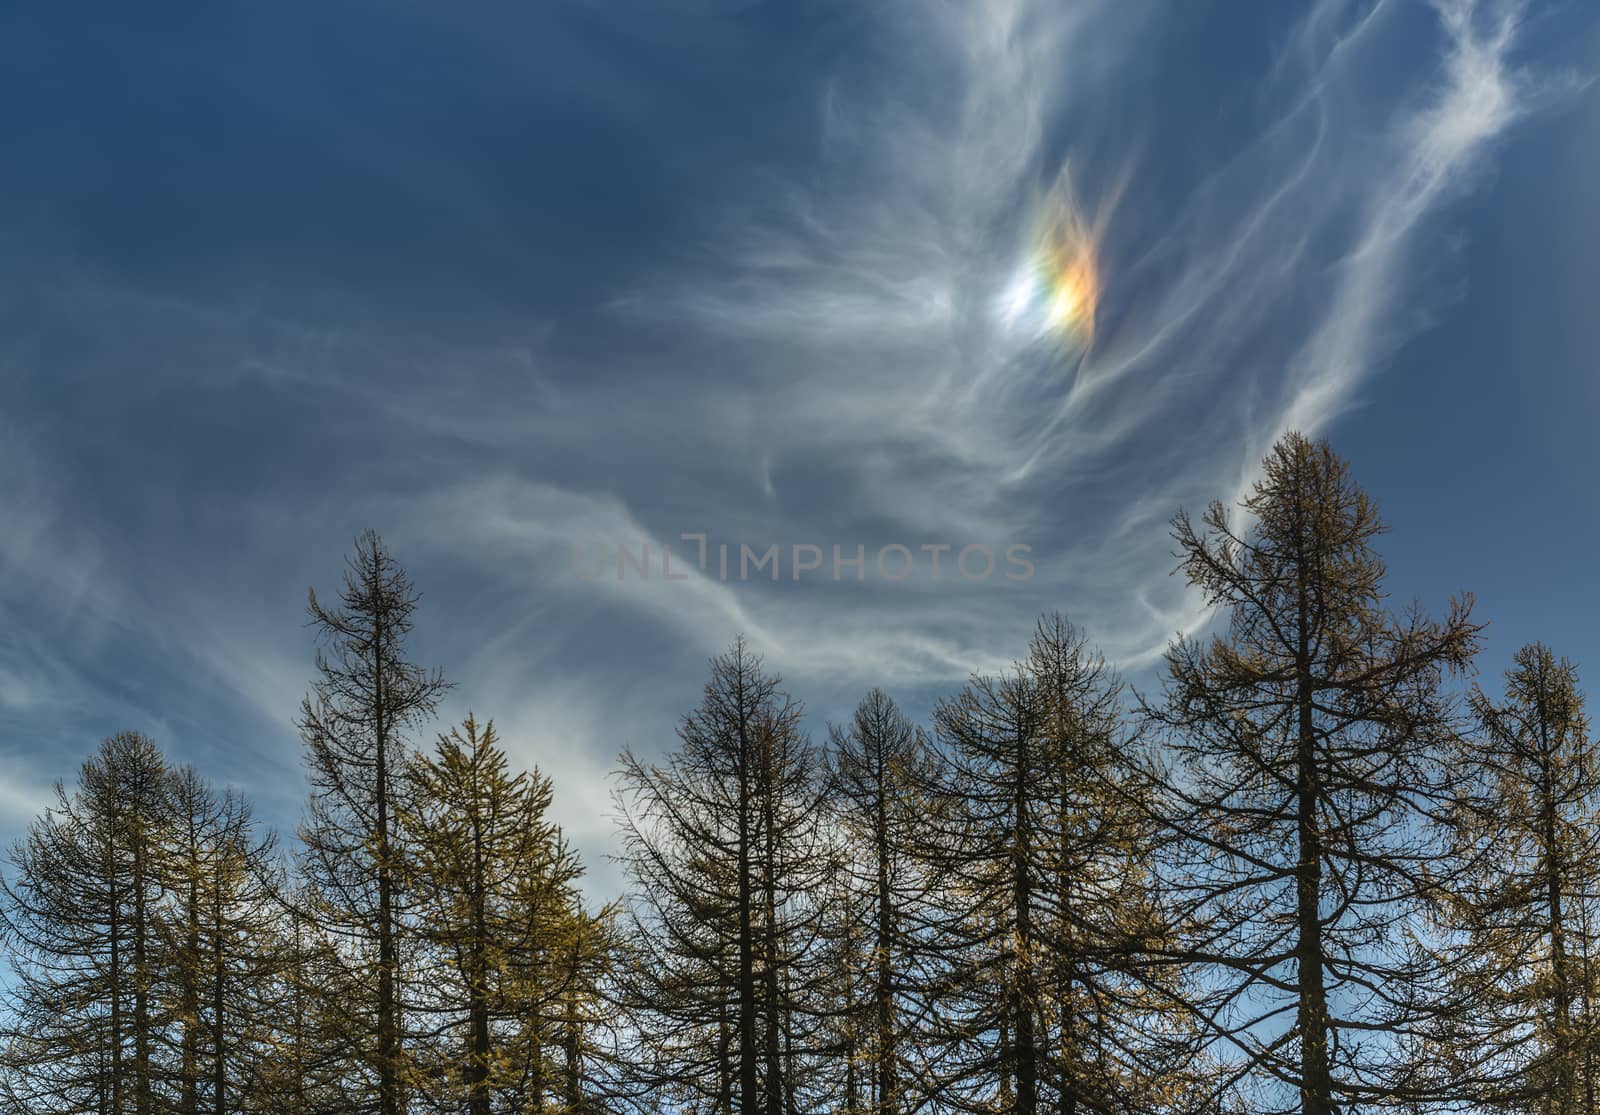 Parhelion in the autumn sky and clouds